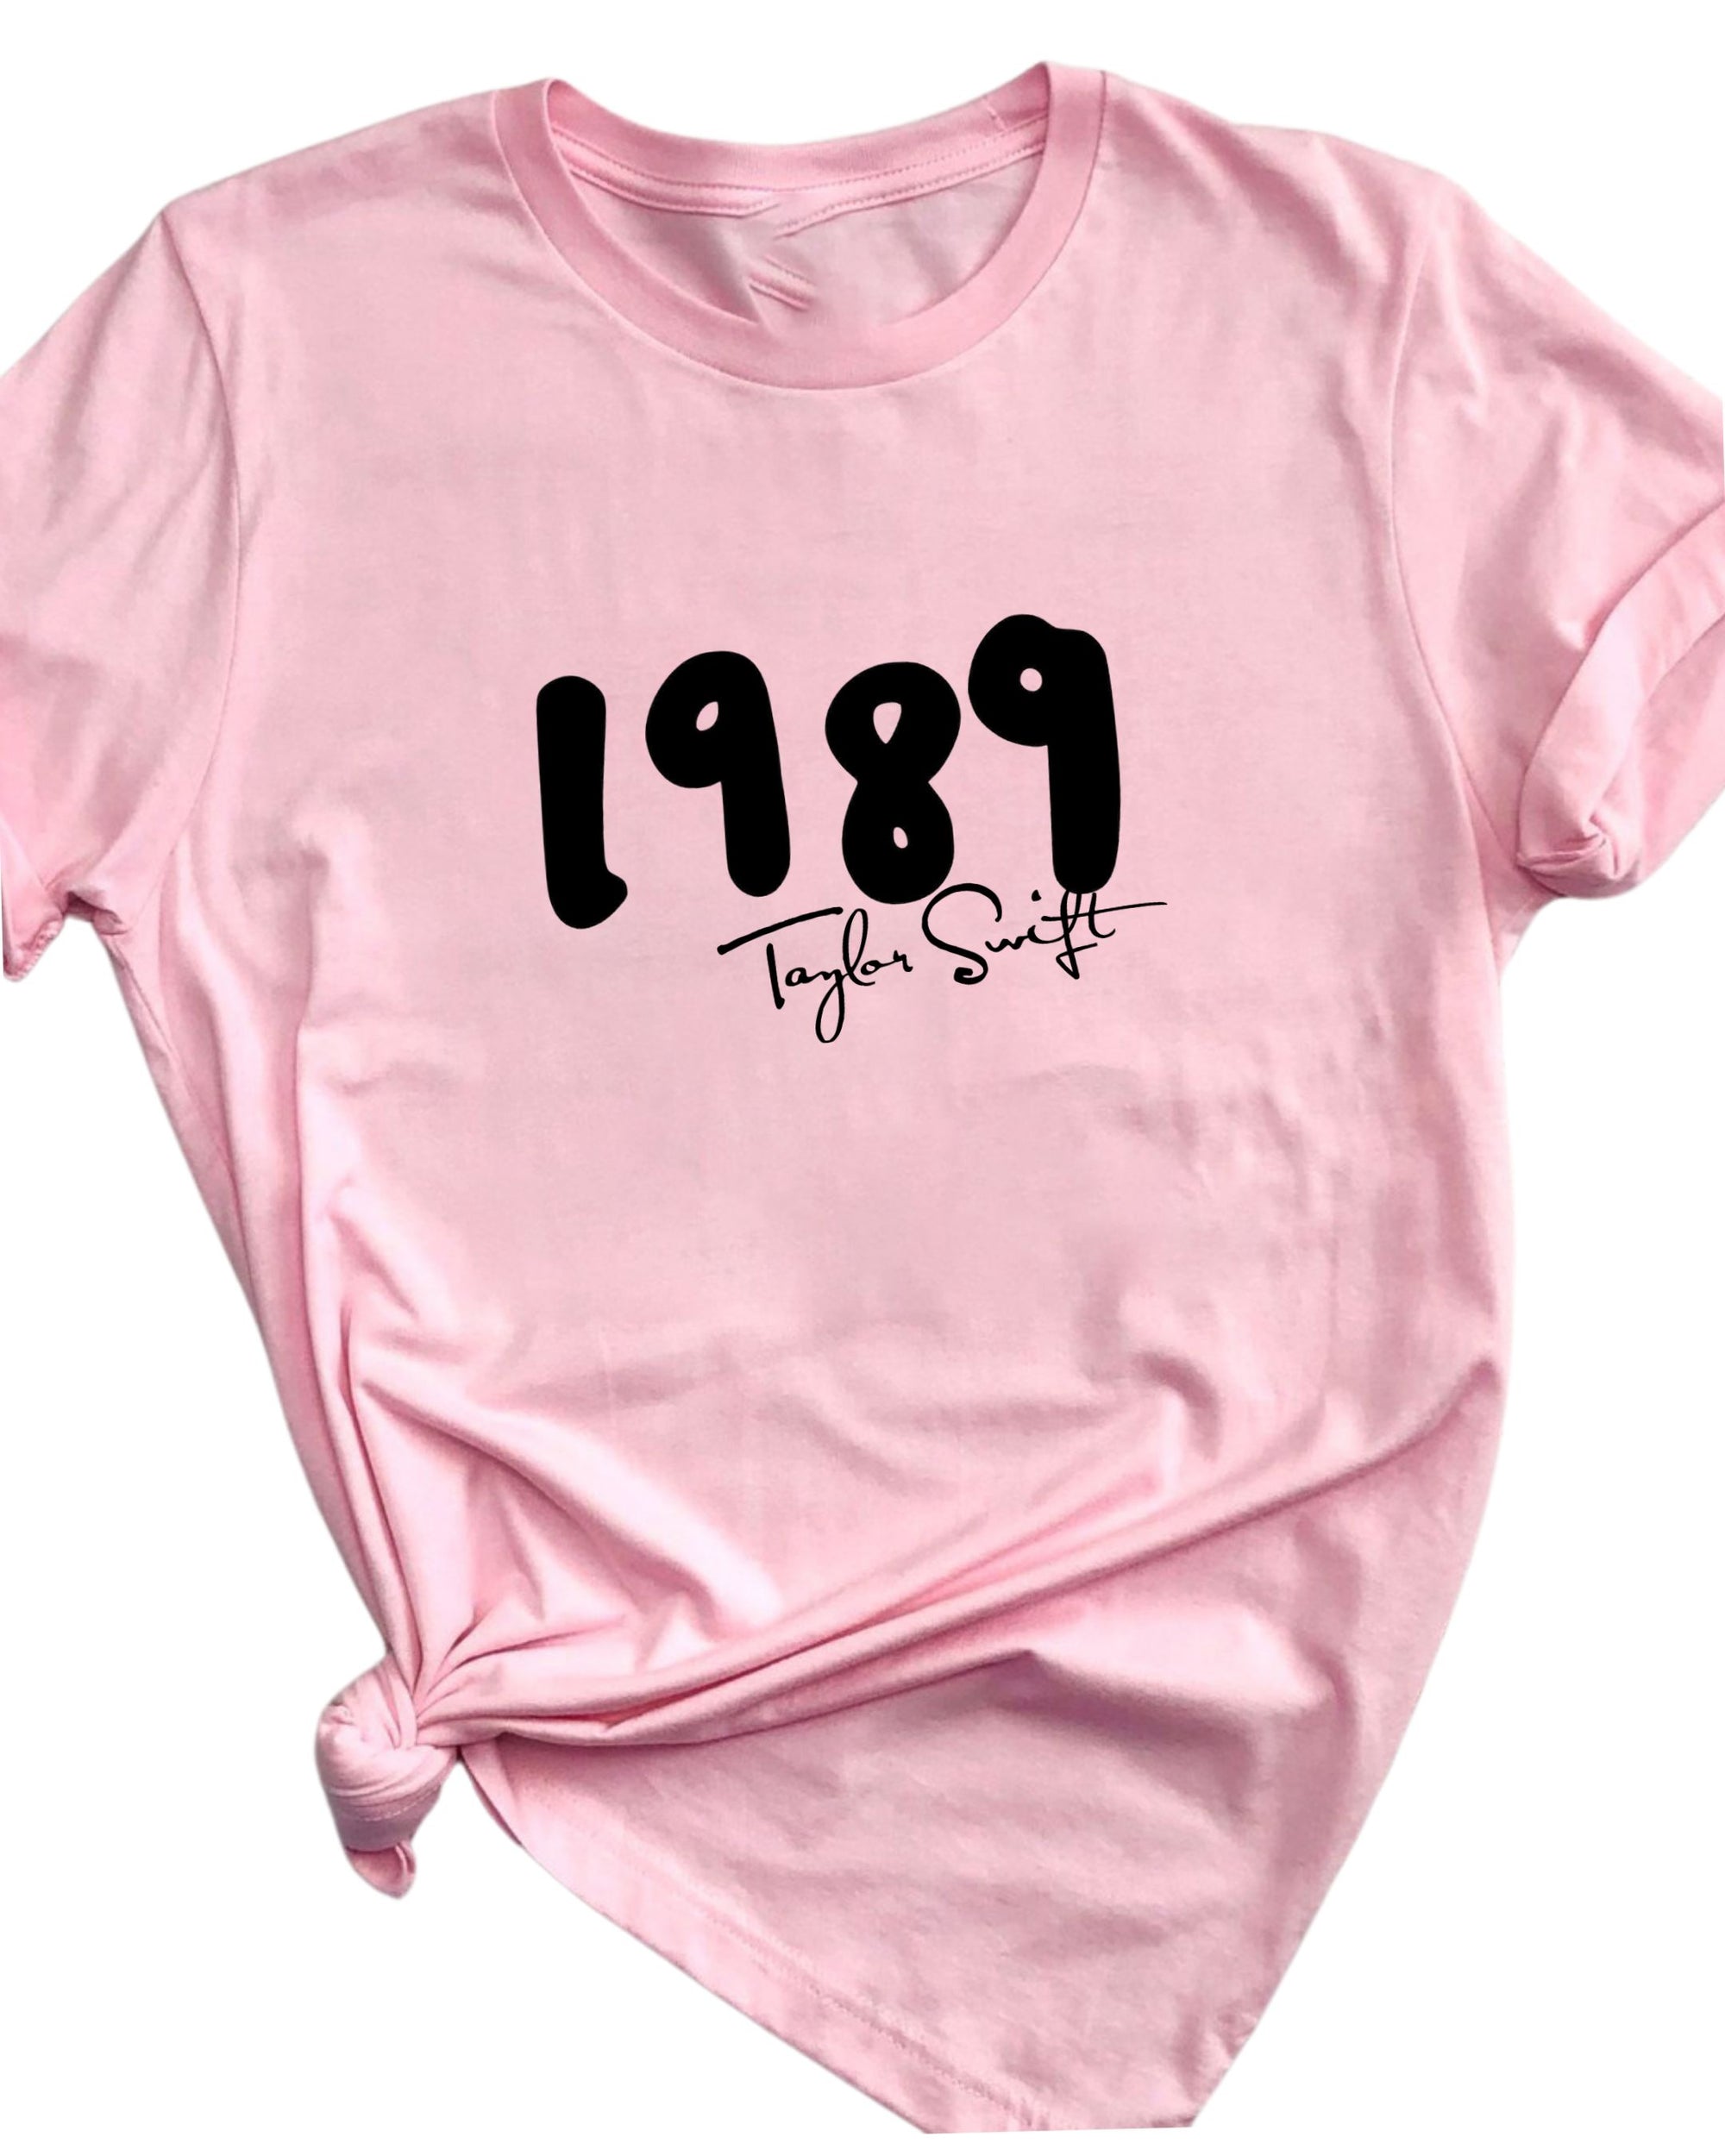 1989 Taylor Swift Pink Shirt | Youth & Adult